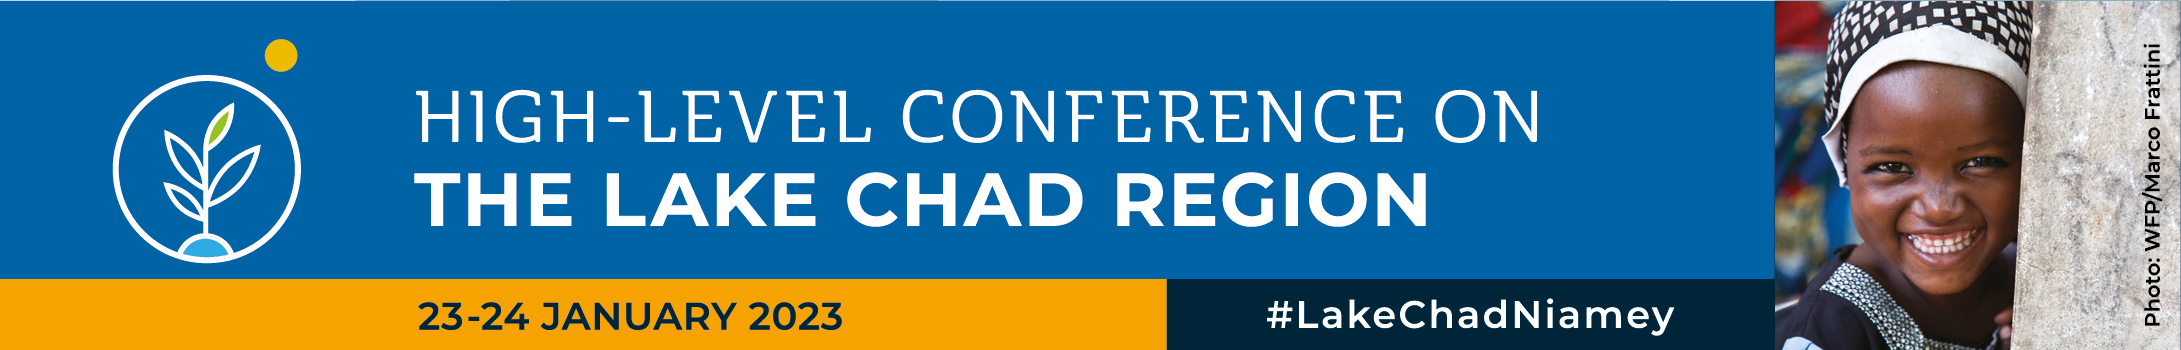 3rd High-Level Conference on the Lake Chad Region